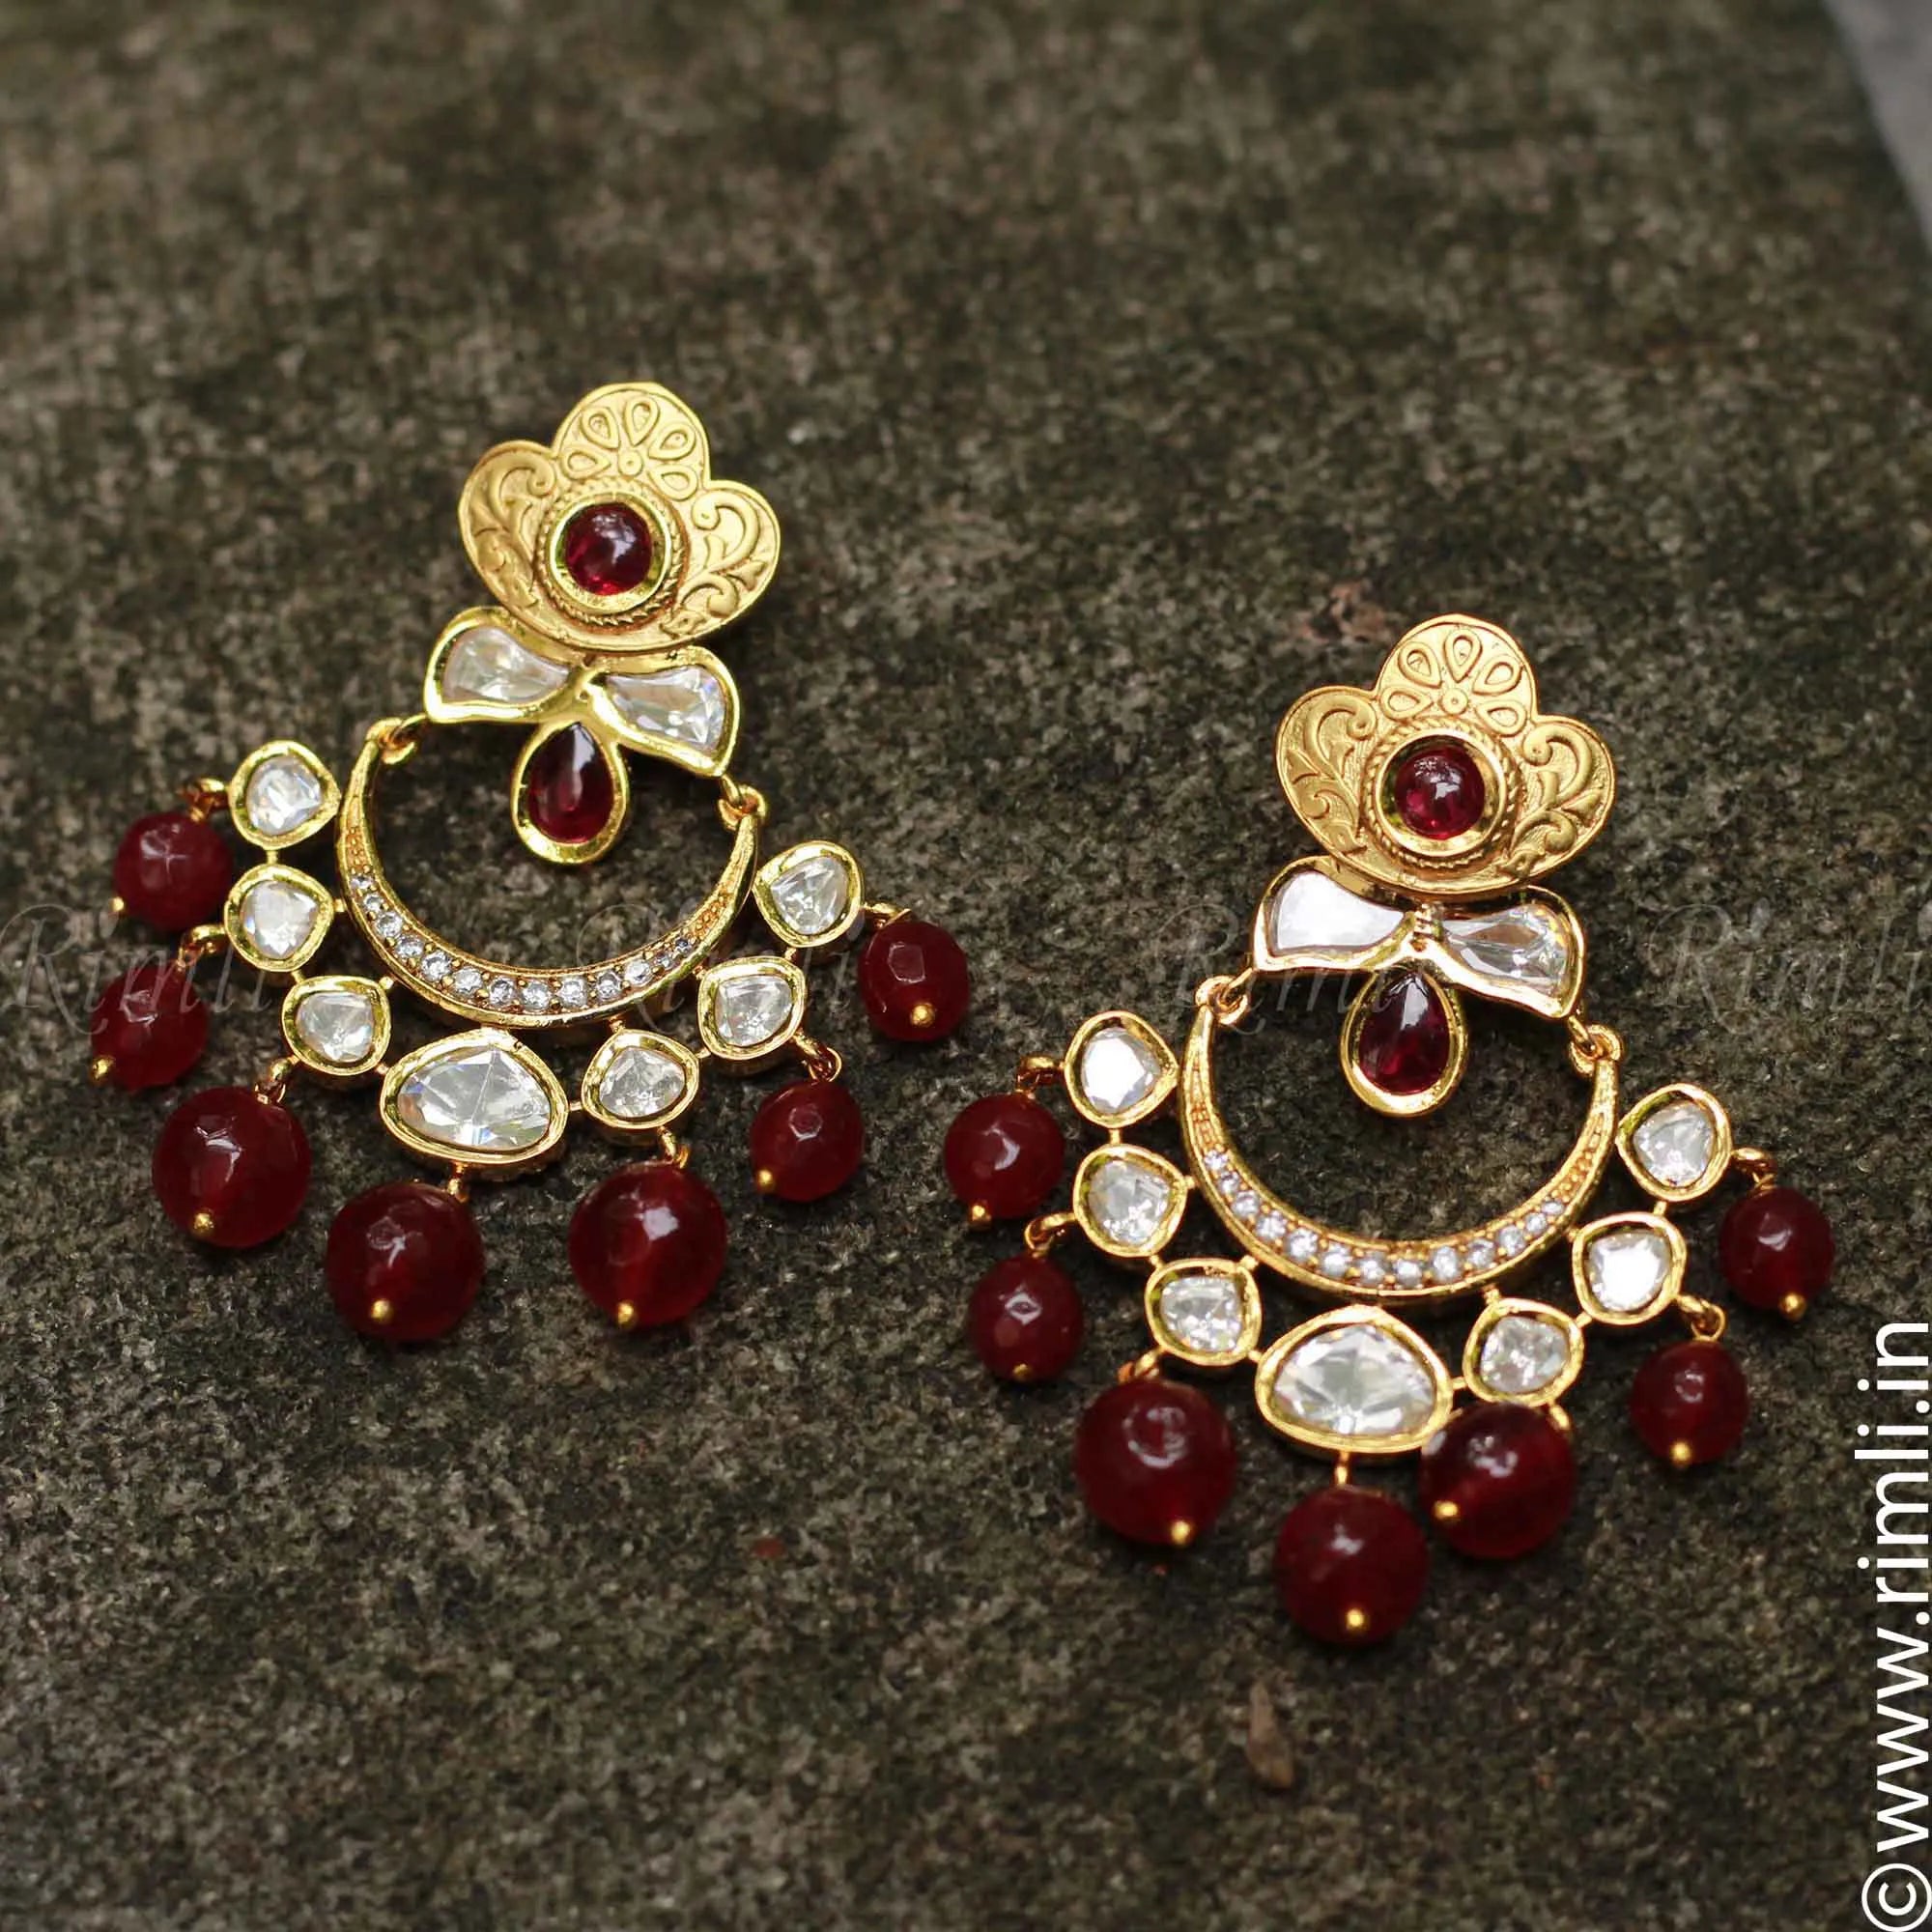 Chandbali Earrings Handcrafted With White Maroon Stones.